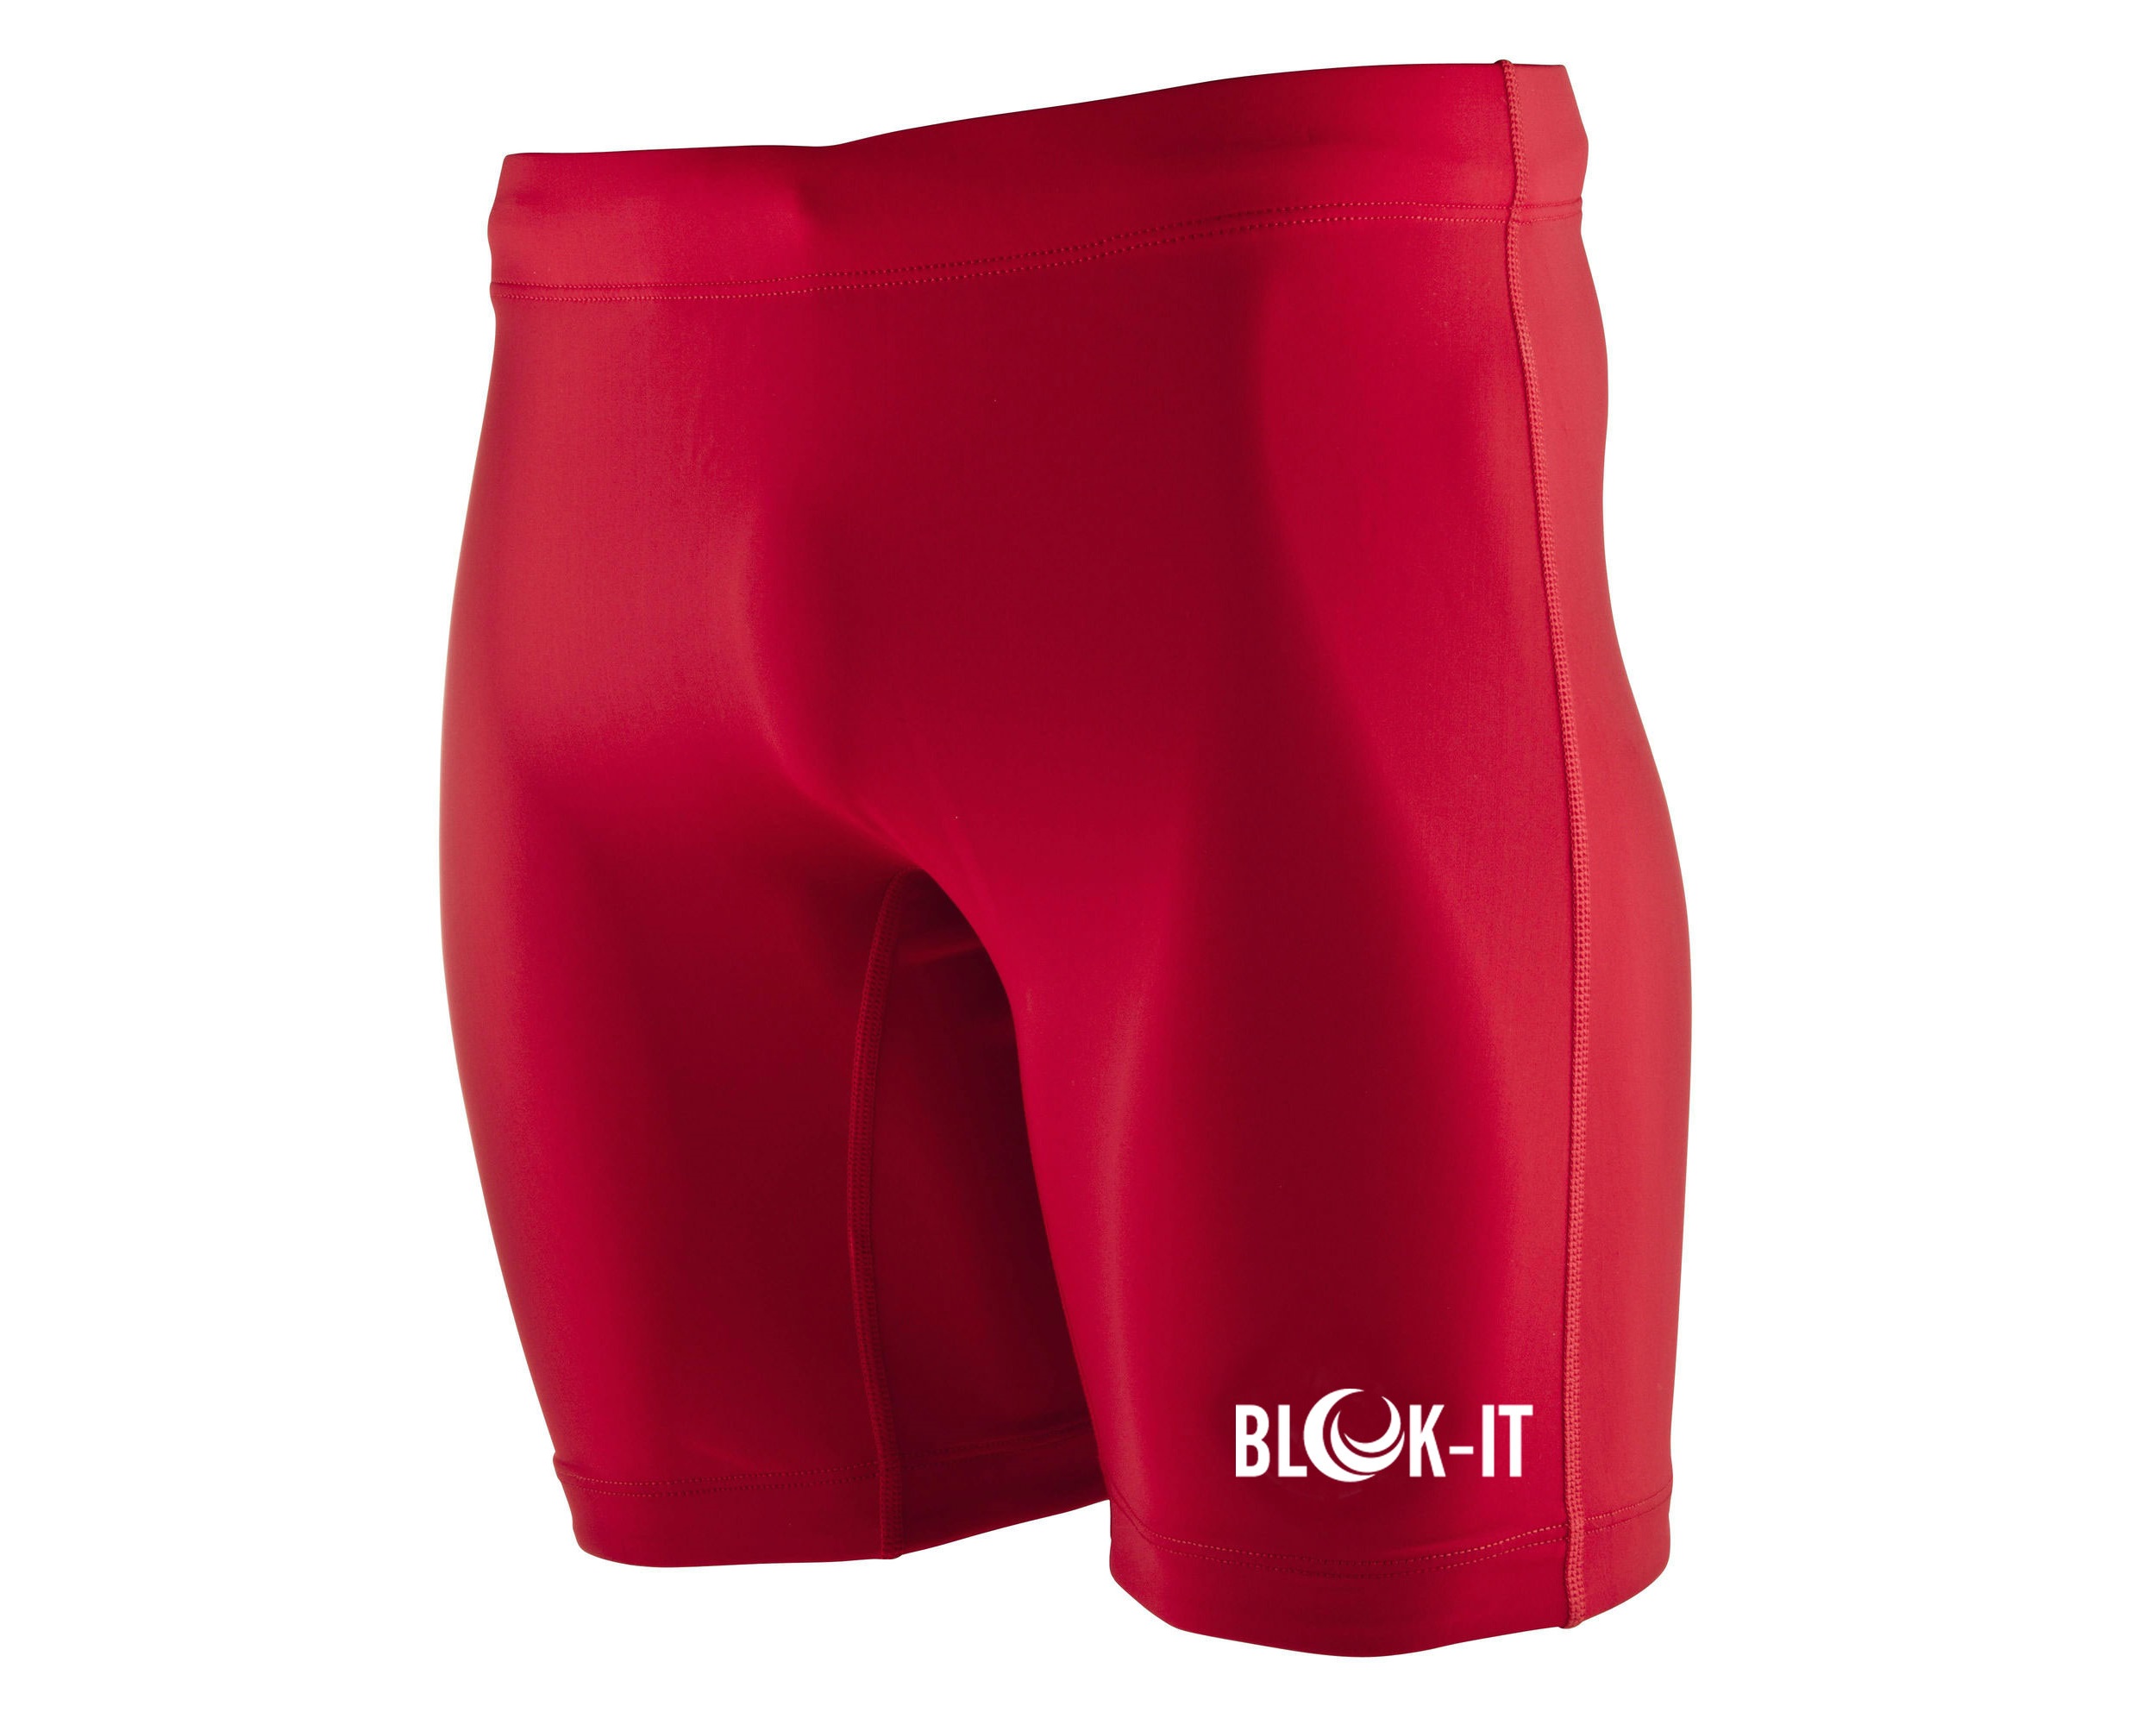 Gym Athletics and Jogging Suitable for Running Blok-iT Compression Shorts Cycling 